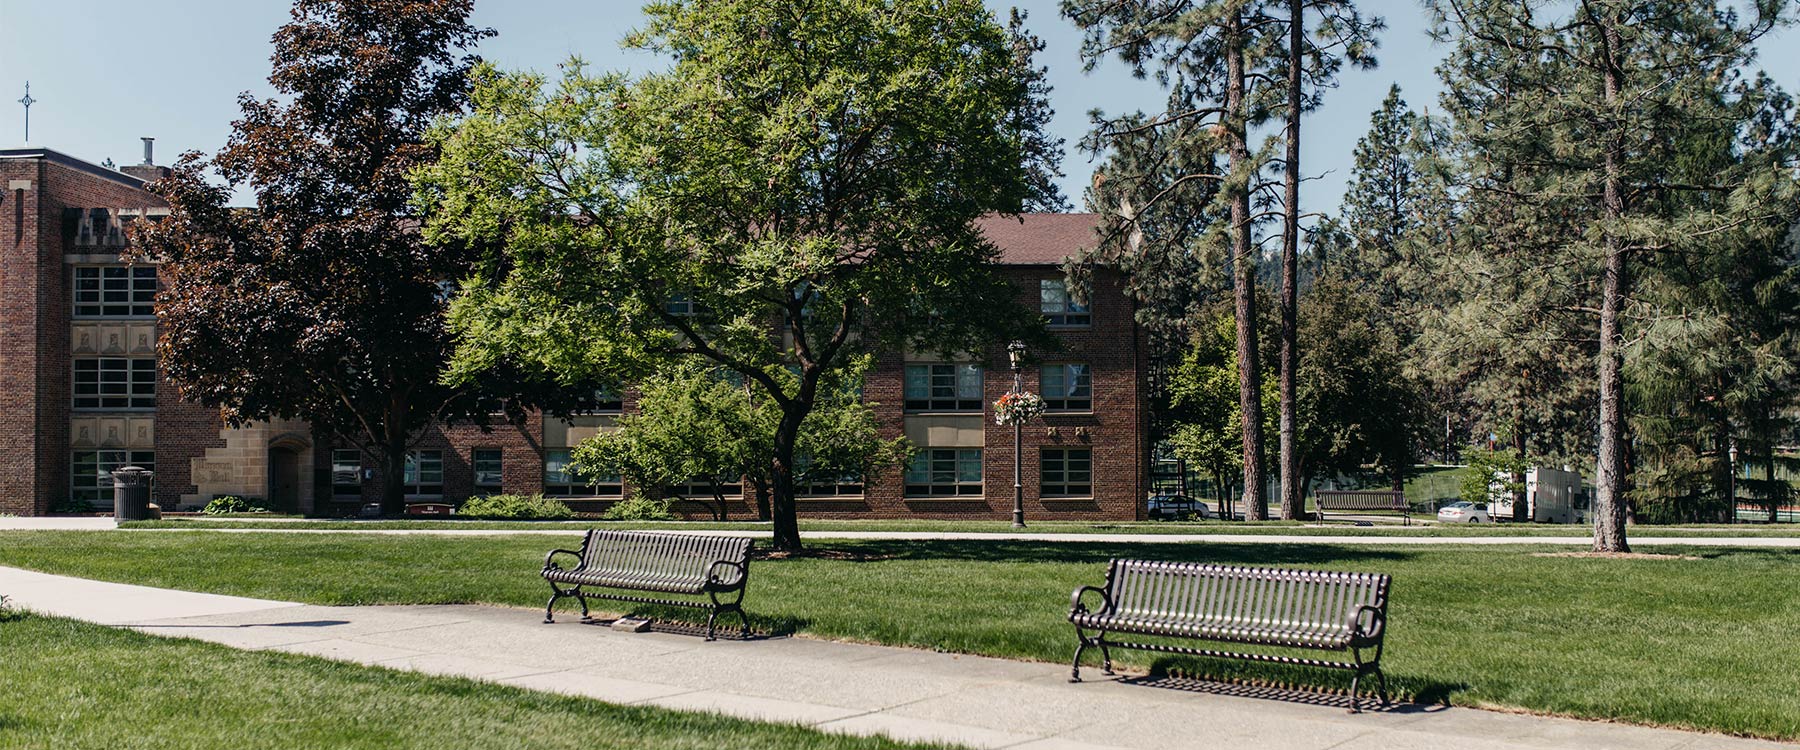 Two benches along a path between manicured lawns with trees and academic buildings in the background.